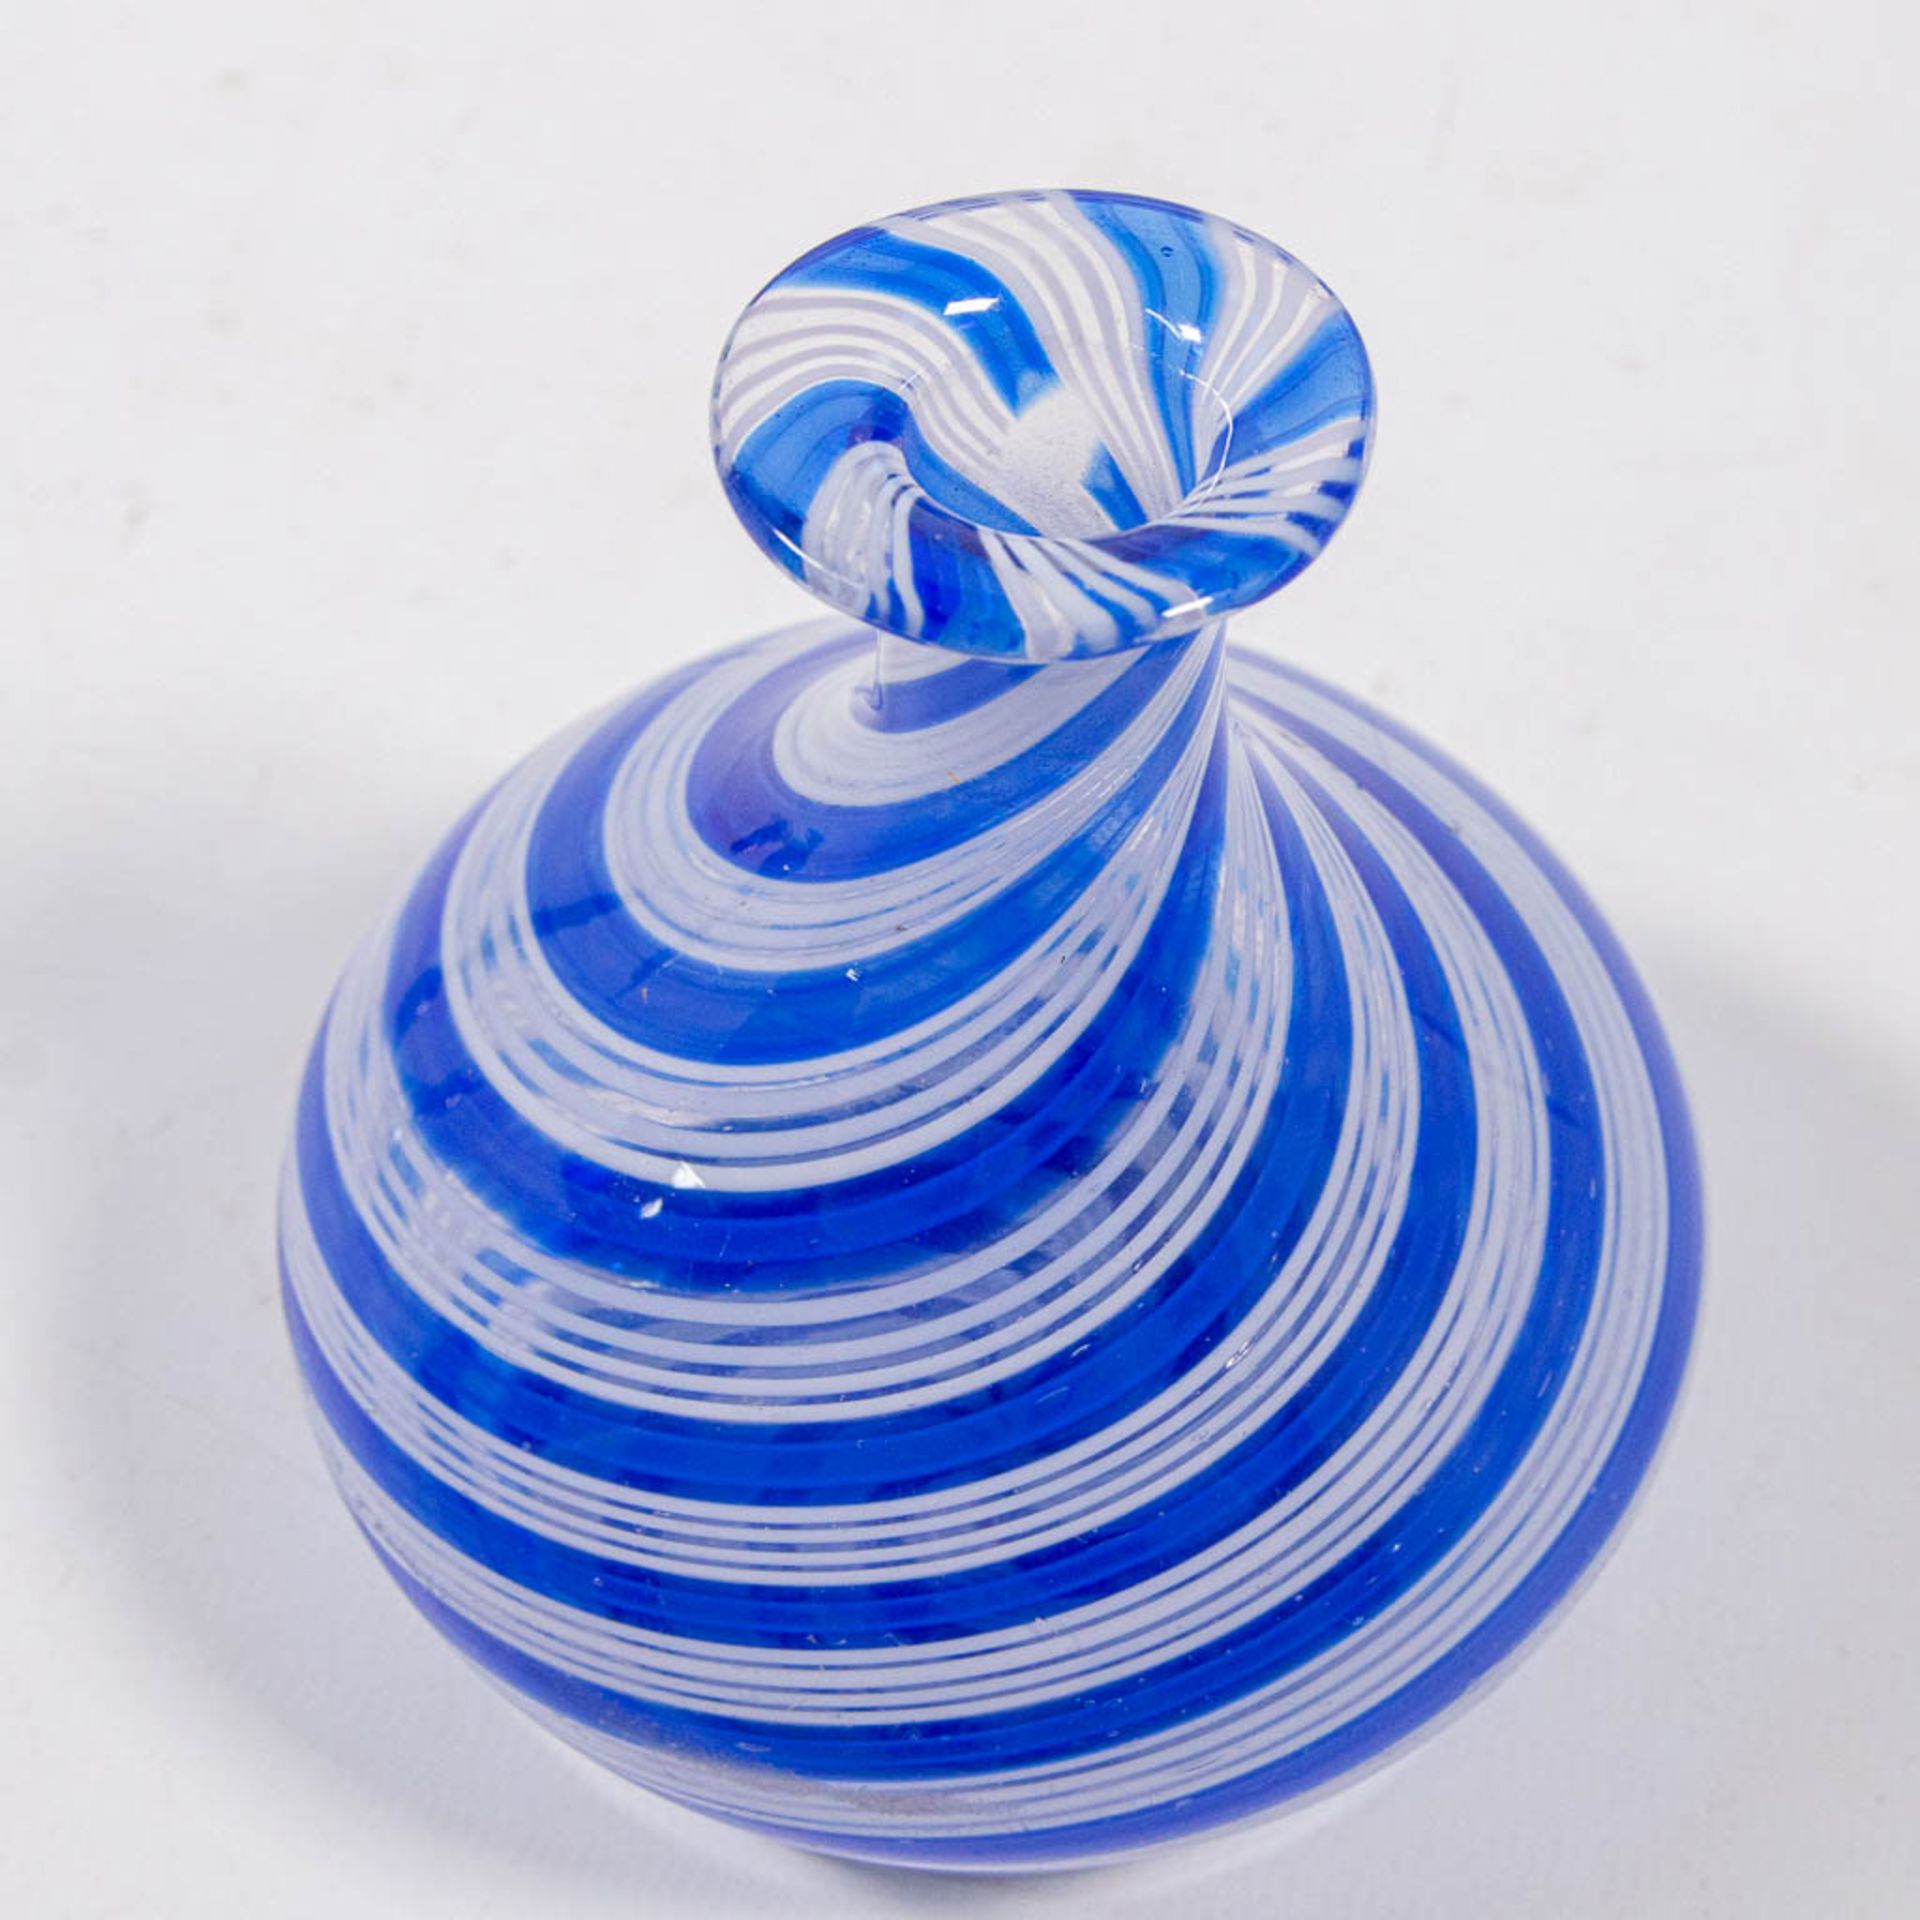 A pair of  decanters with stopper, made in Murano, Italy around 1950. (15 x 9 cm) - Bild 8 aus 17